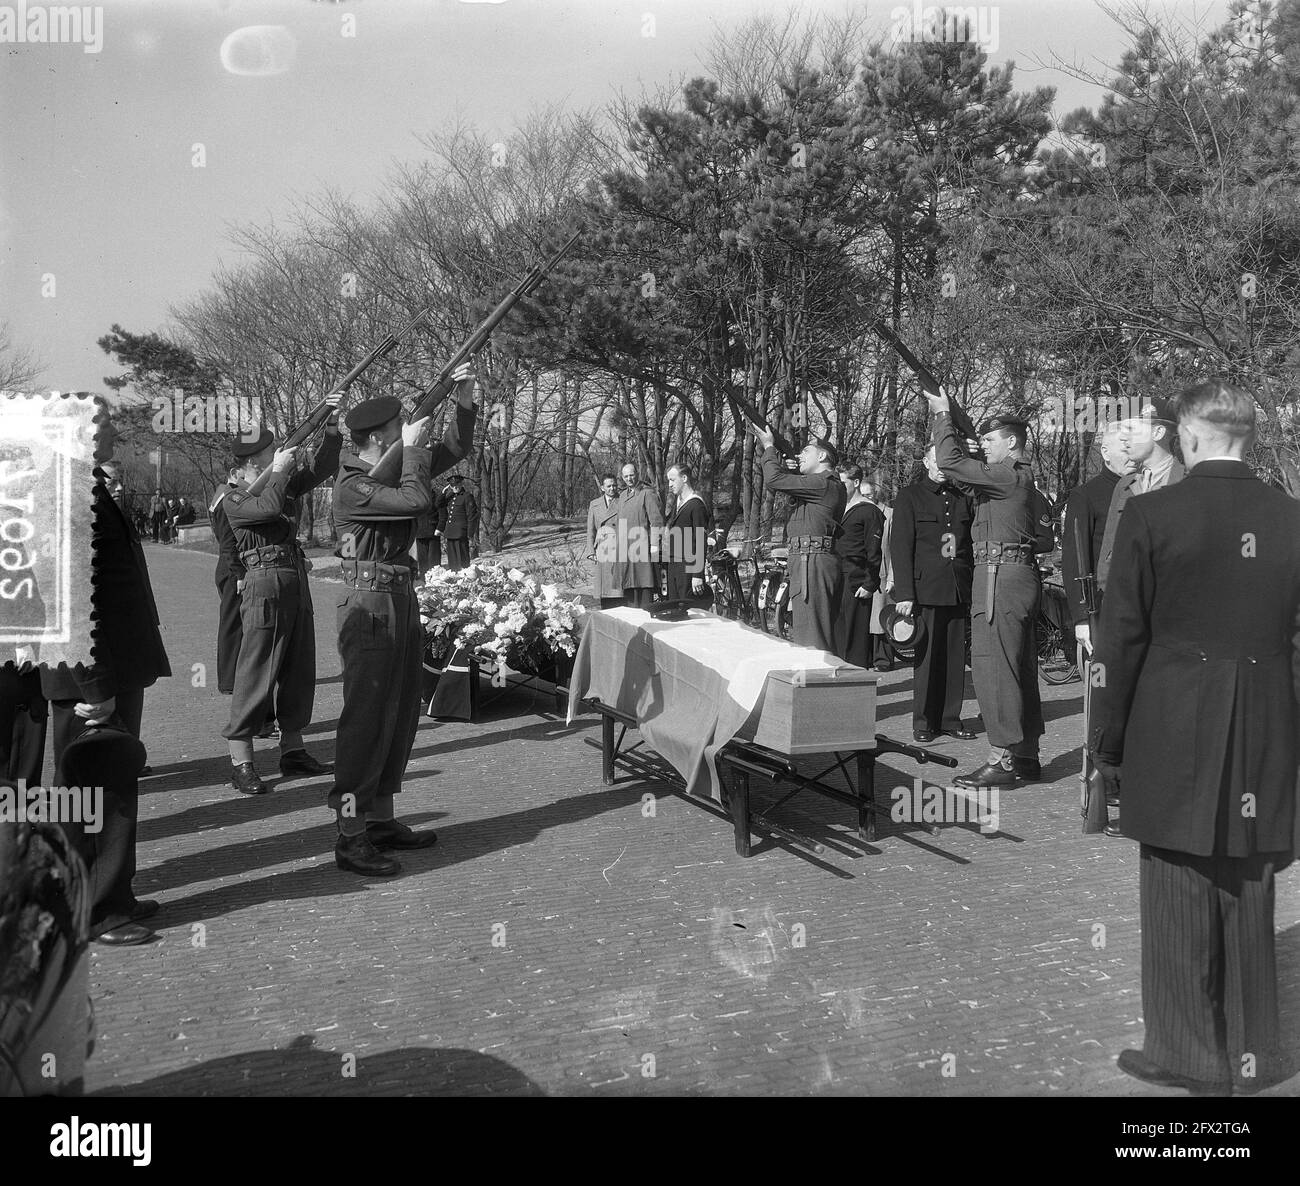 Marvo funeral Den Helder military workman Beishuizen, April 29, 1955, Funerals, The Netherlands, 20th century press agency photo, news to remember, documentary, historic photography 1945-1990, visual stories, human history of the Twentieth Century, capturing moments in time Stock Photo